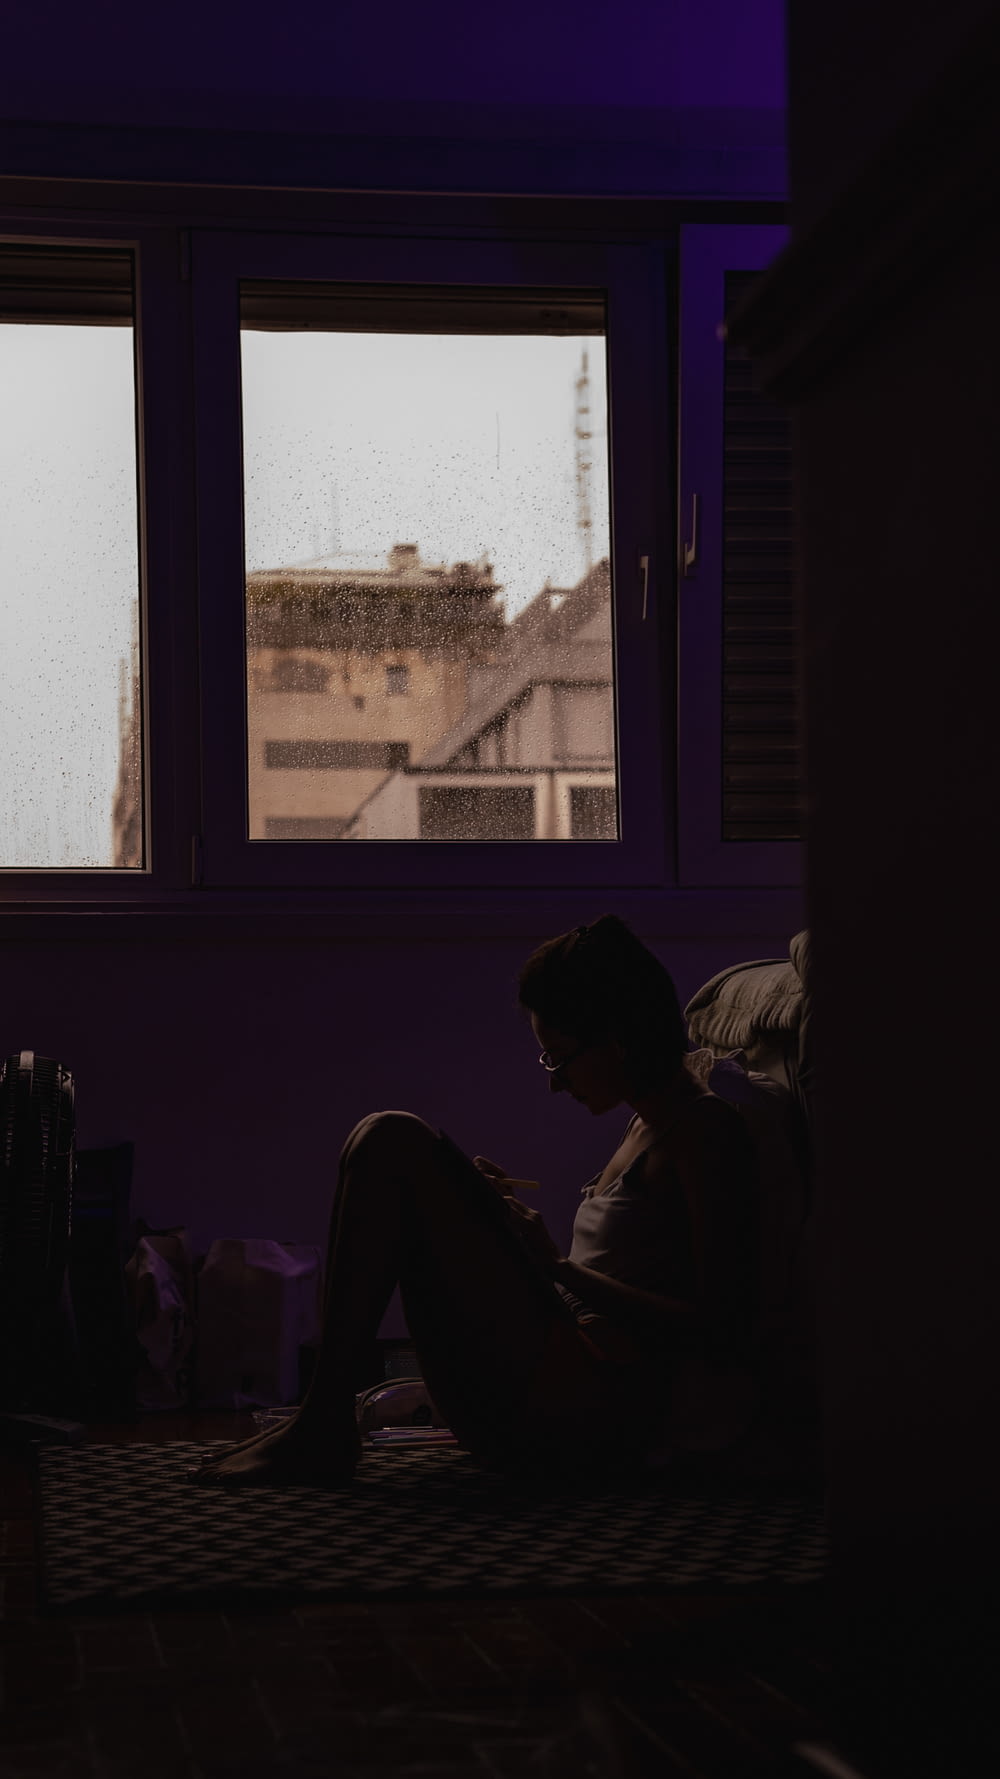 a person sitting on a bed in front of a window